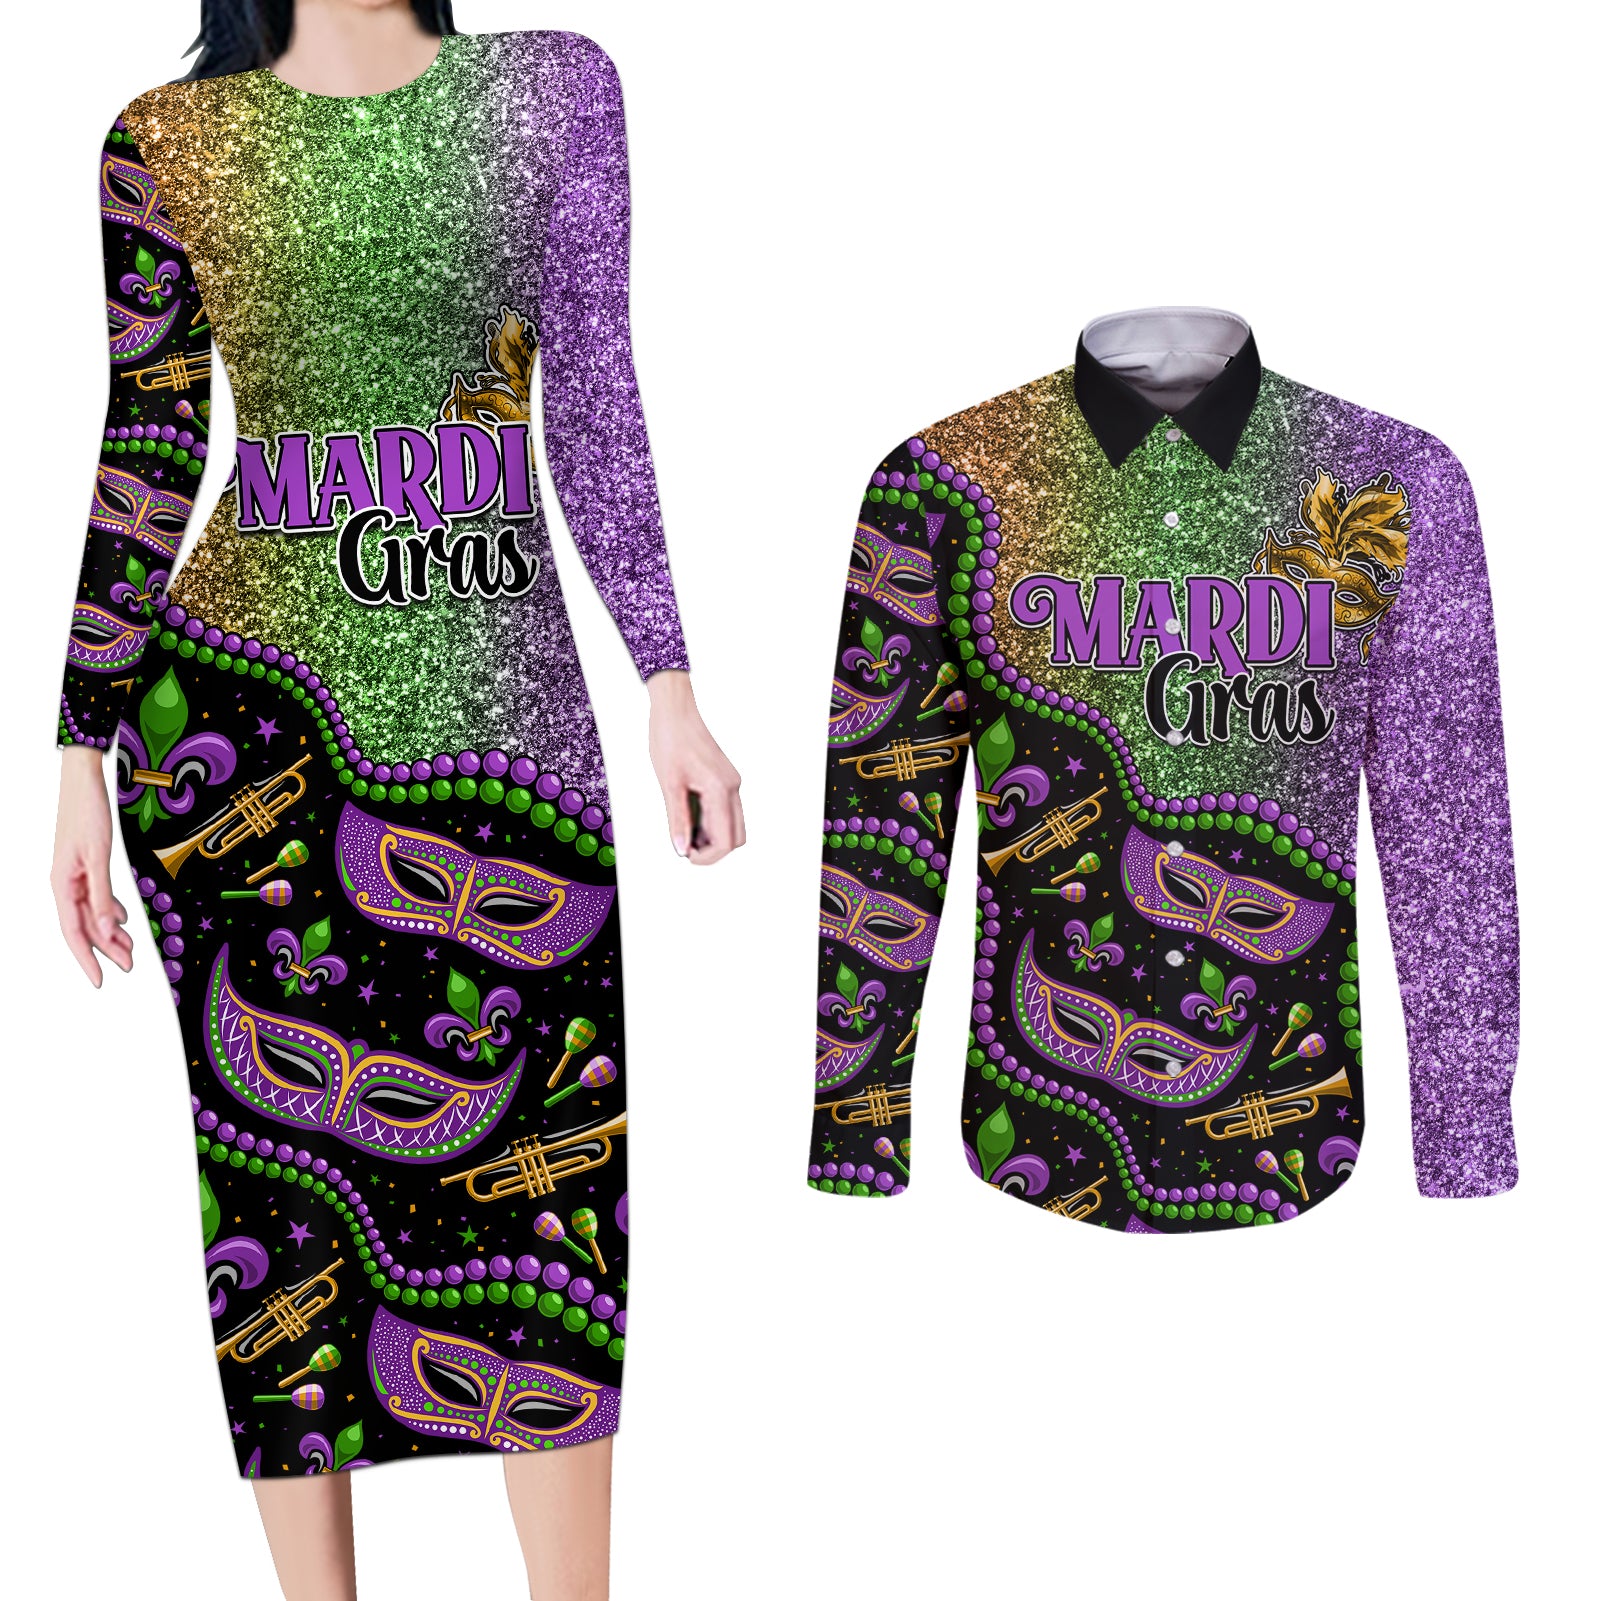 mardi-gras-couples-matching-long-sleeve-bodycon-dress-and-long-sleeve-button-shirt-bling-bling-sparkle-style